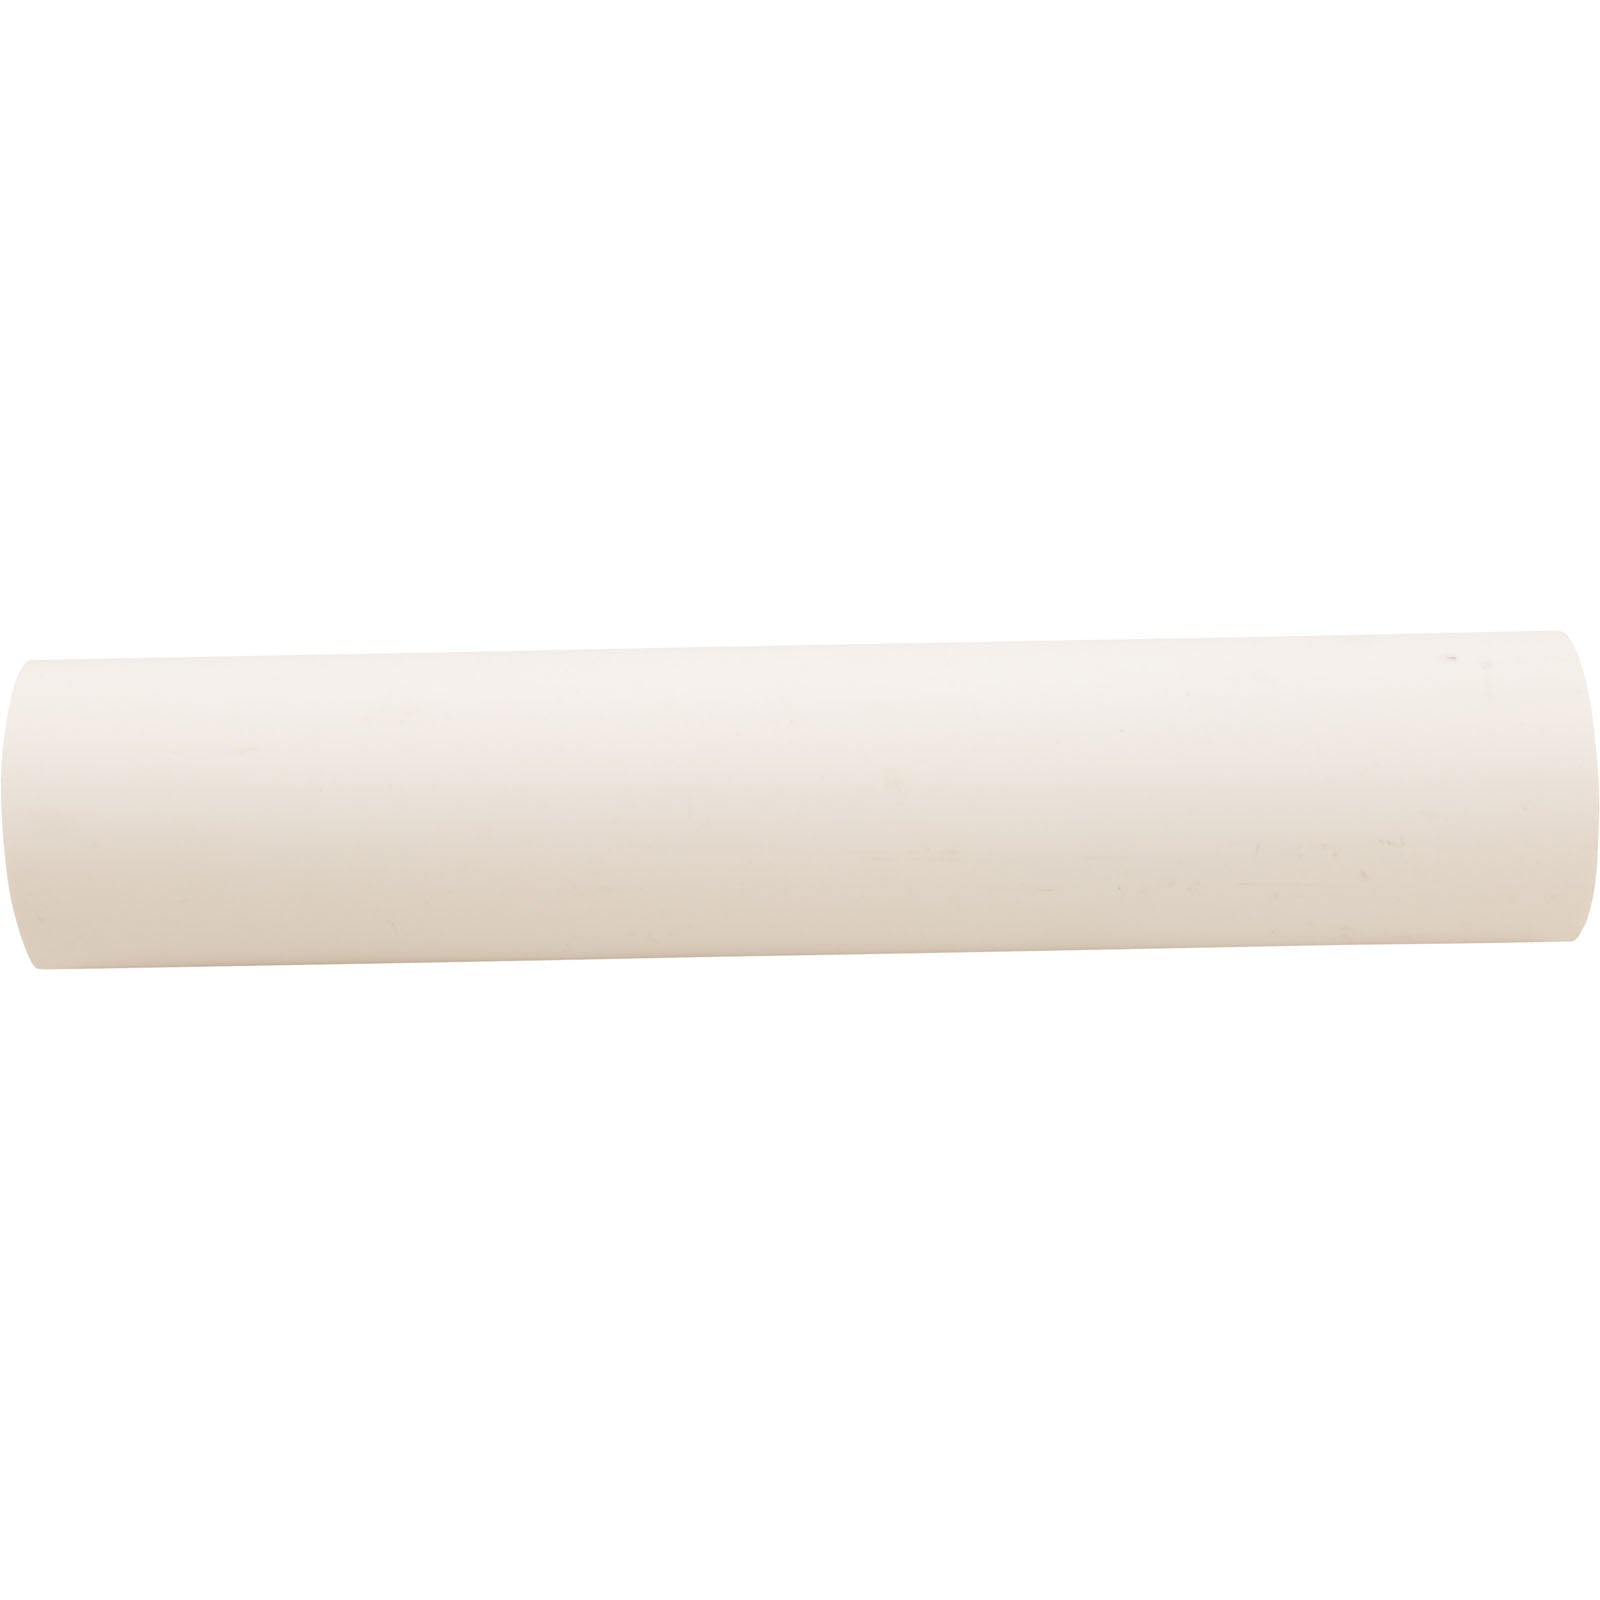 Top Manifold Pipe, Jacuzzi 16041-295